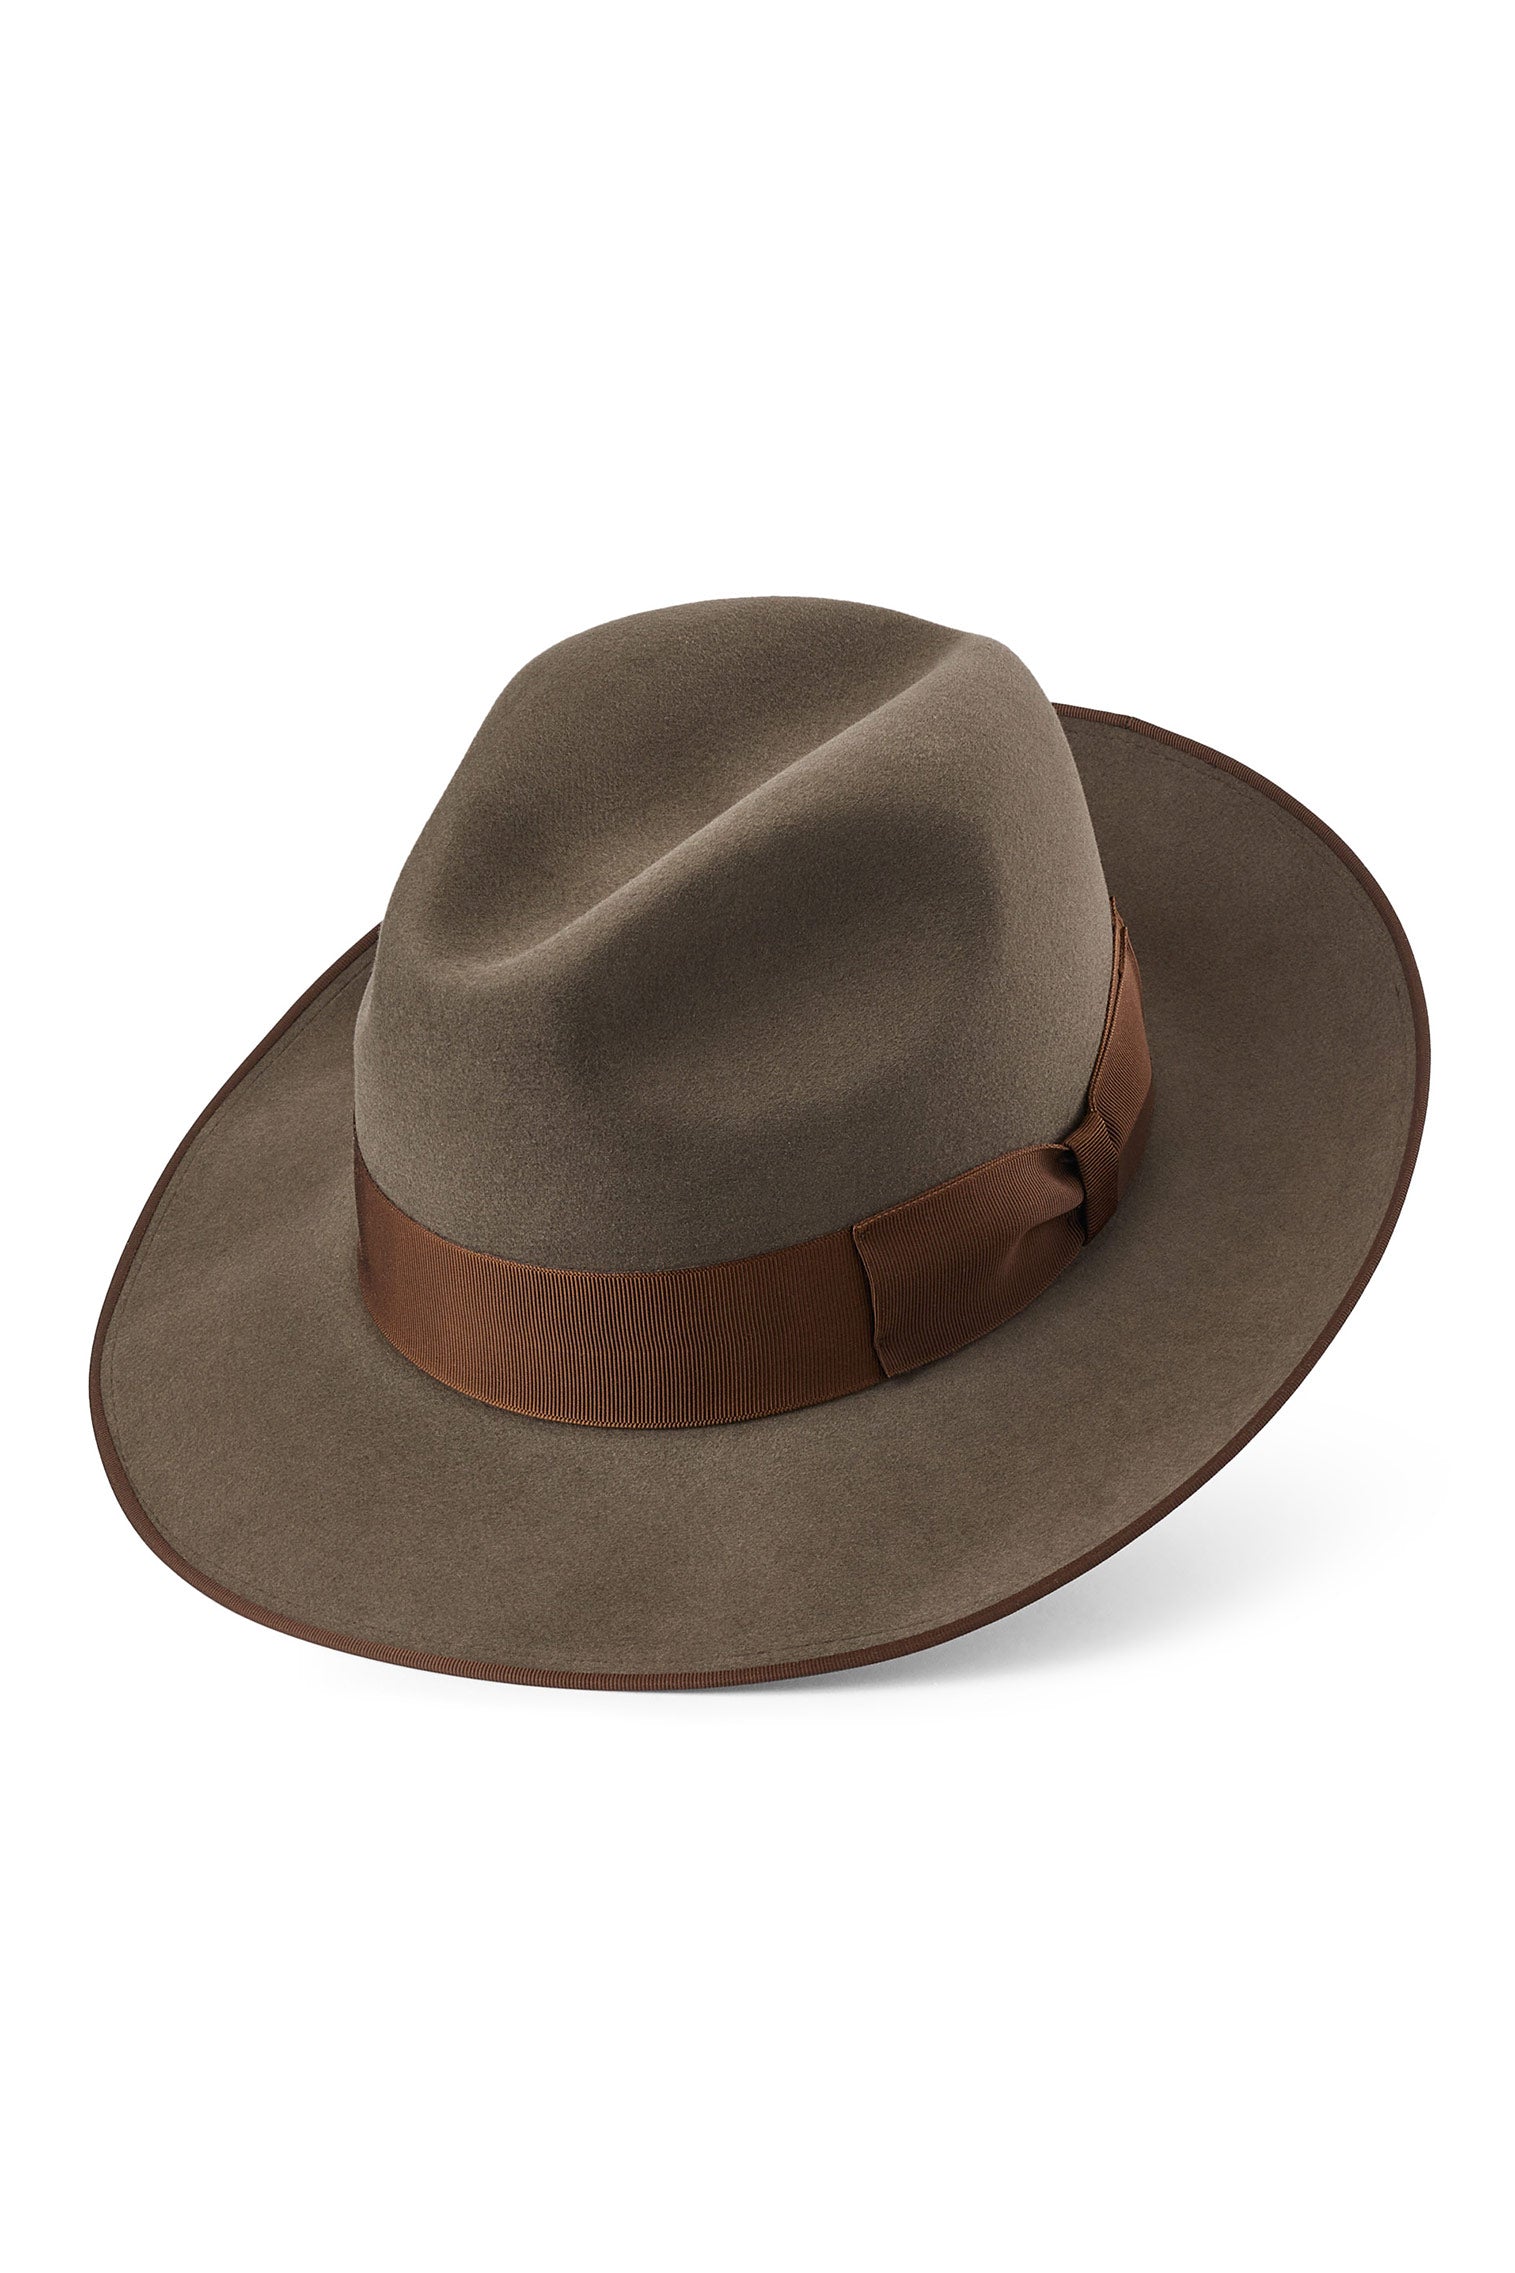 St James's Fedora - Father's Day Gift Guide - Lock & Co. Hatters London UK